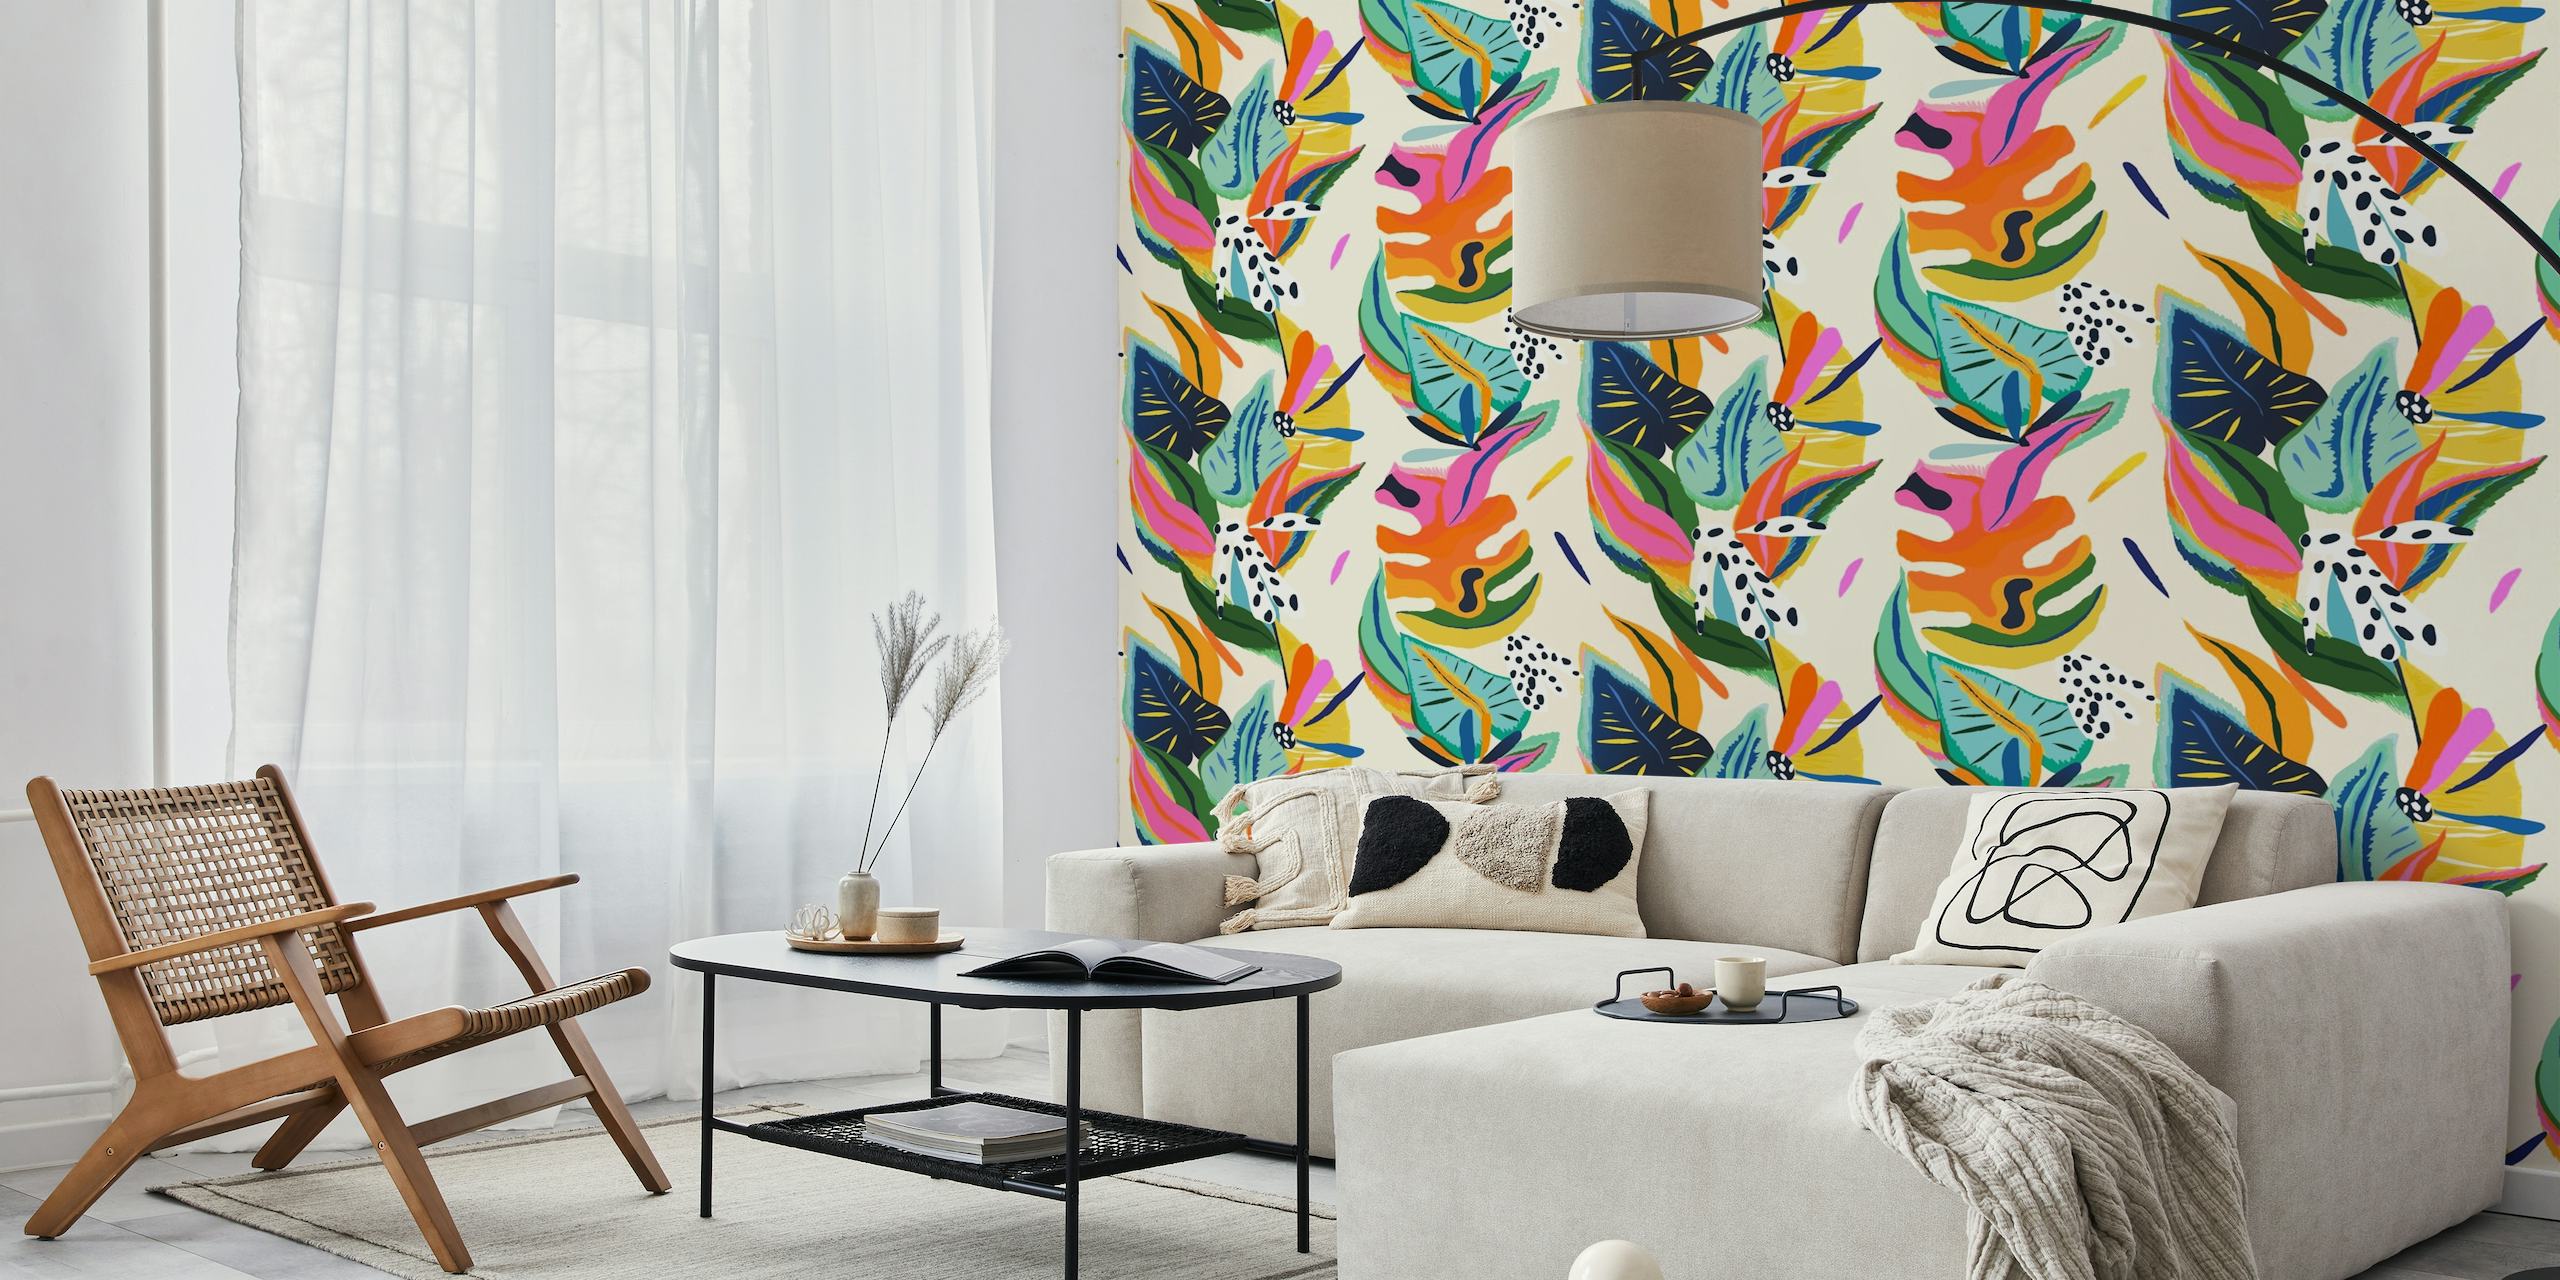 Vibrant modern exotic jungle wall mural with colorful tropical foliage and butterflies